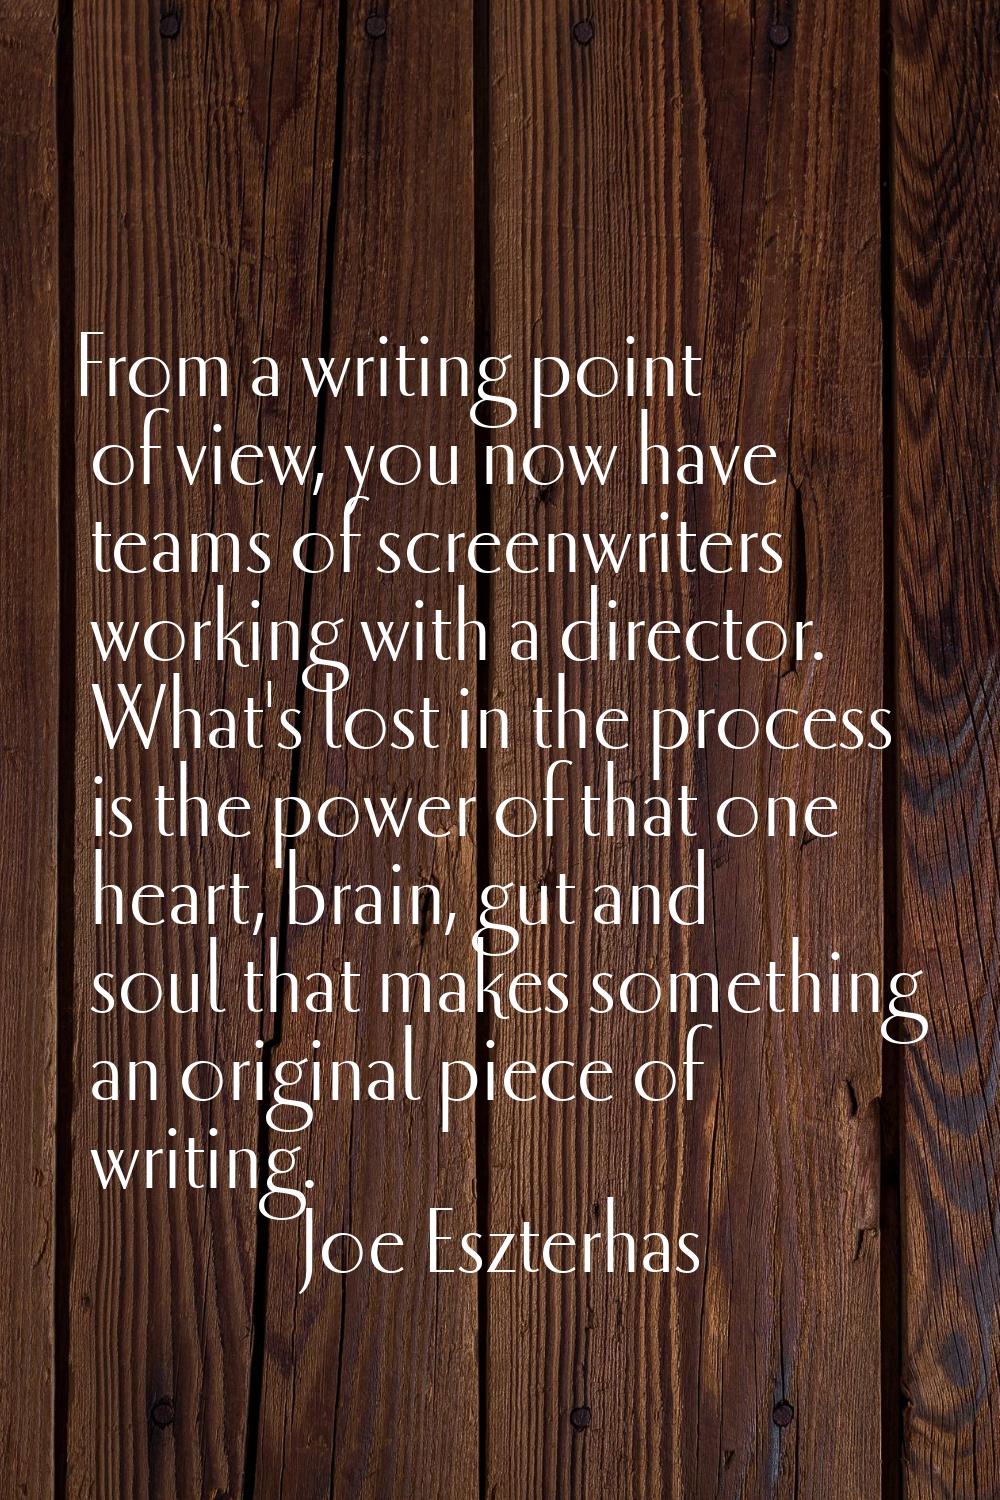 From a writing point of view, you now have teams of screenwriters working with a director. What's l